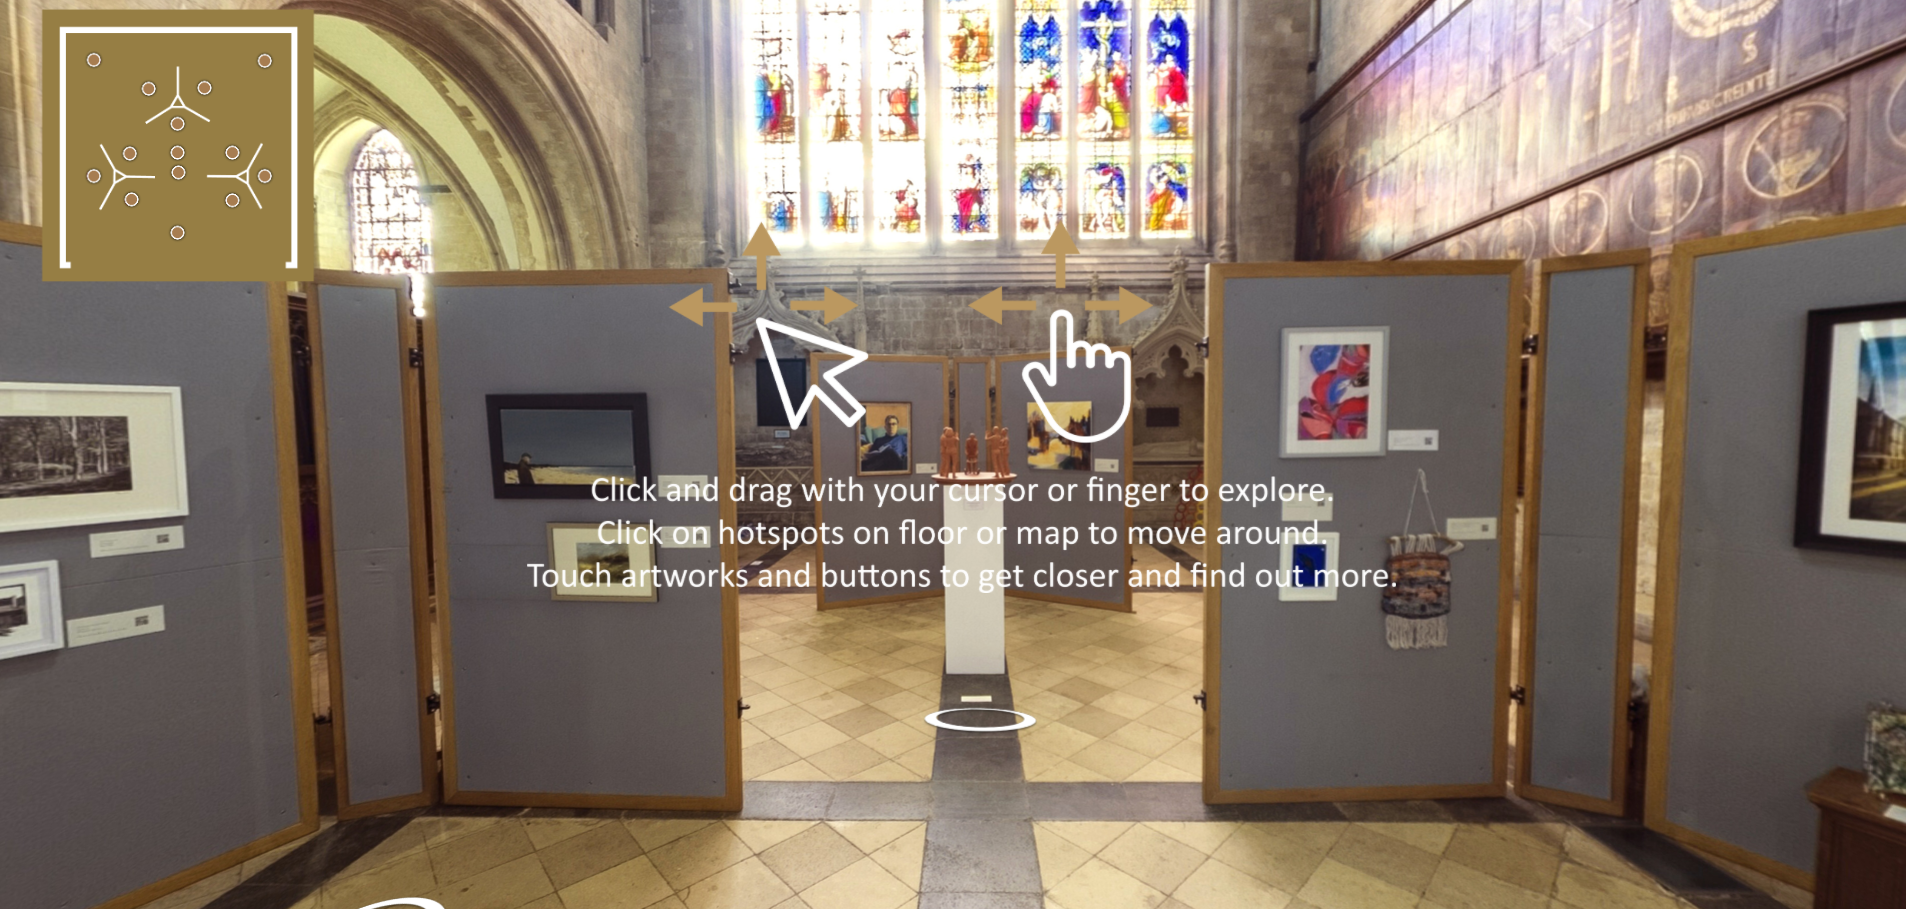 https://www.chichestercathedral.org.uk/virtualexhibition/